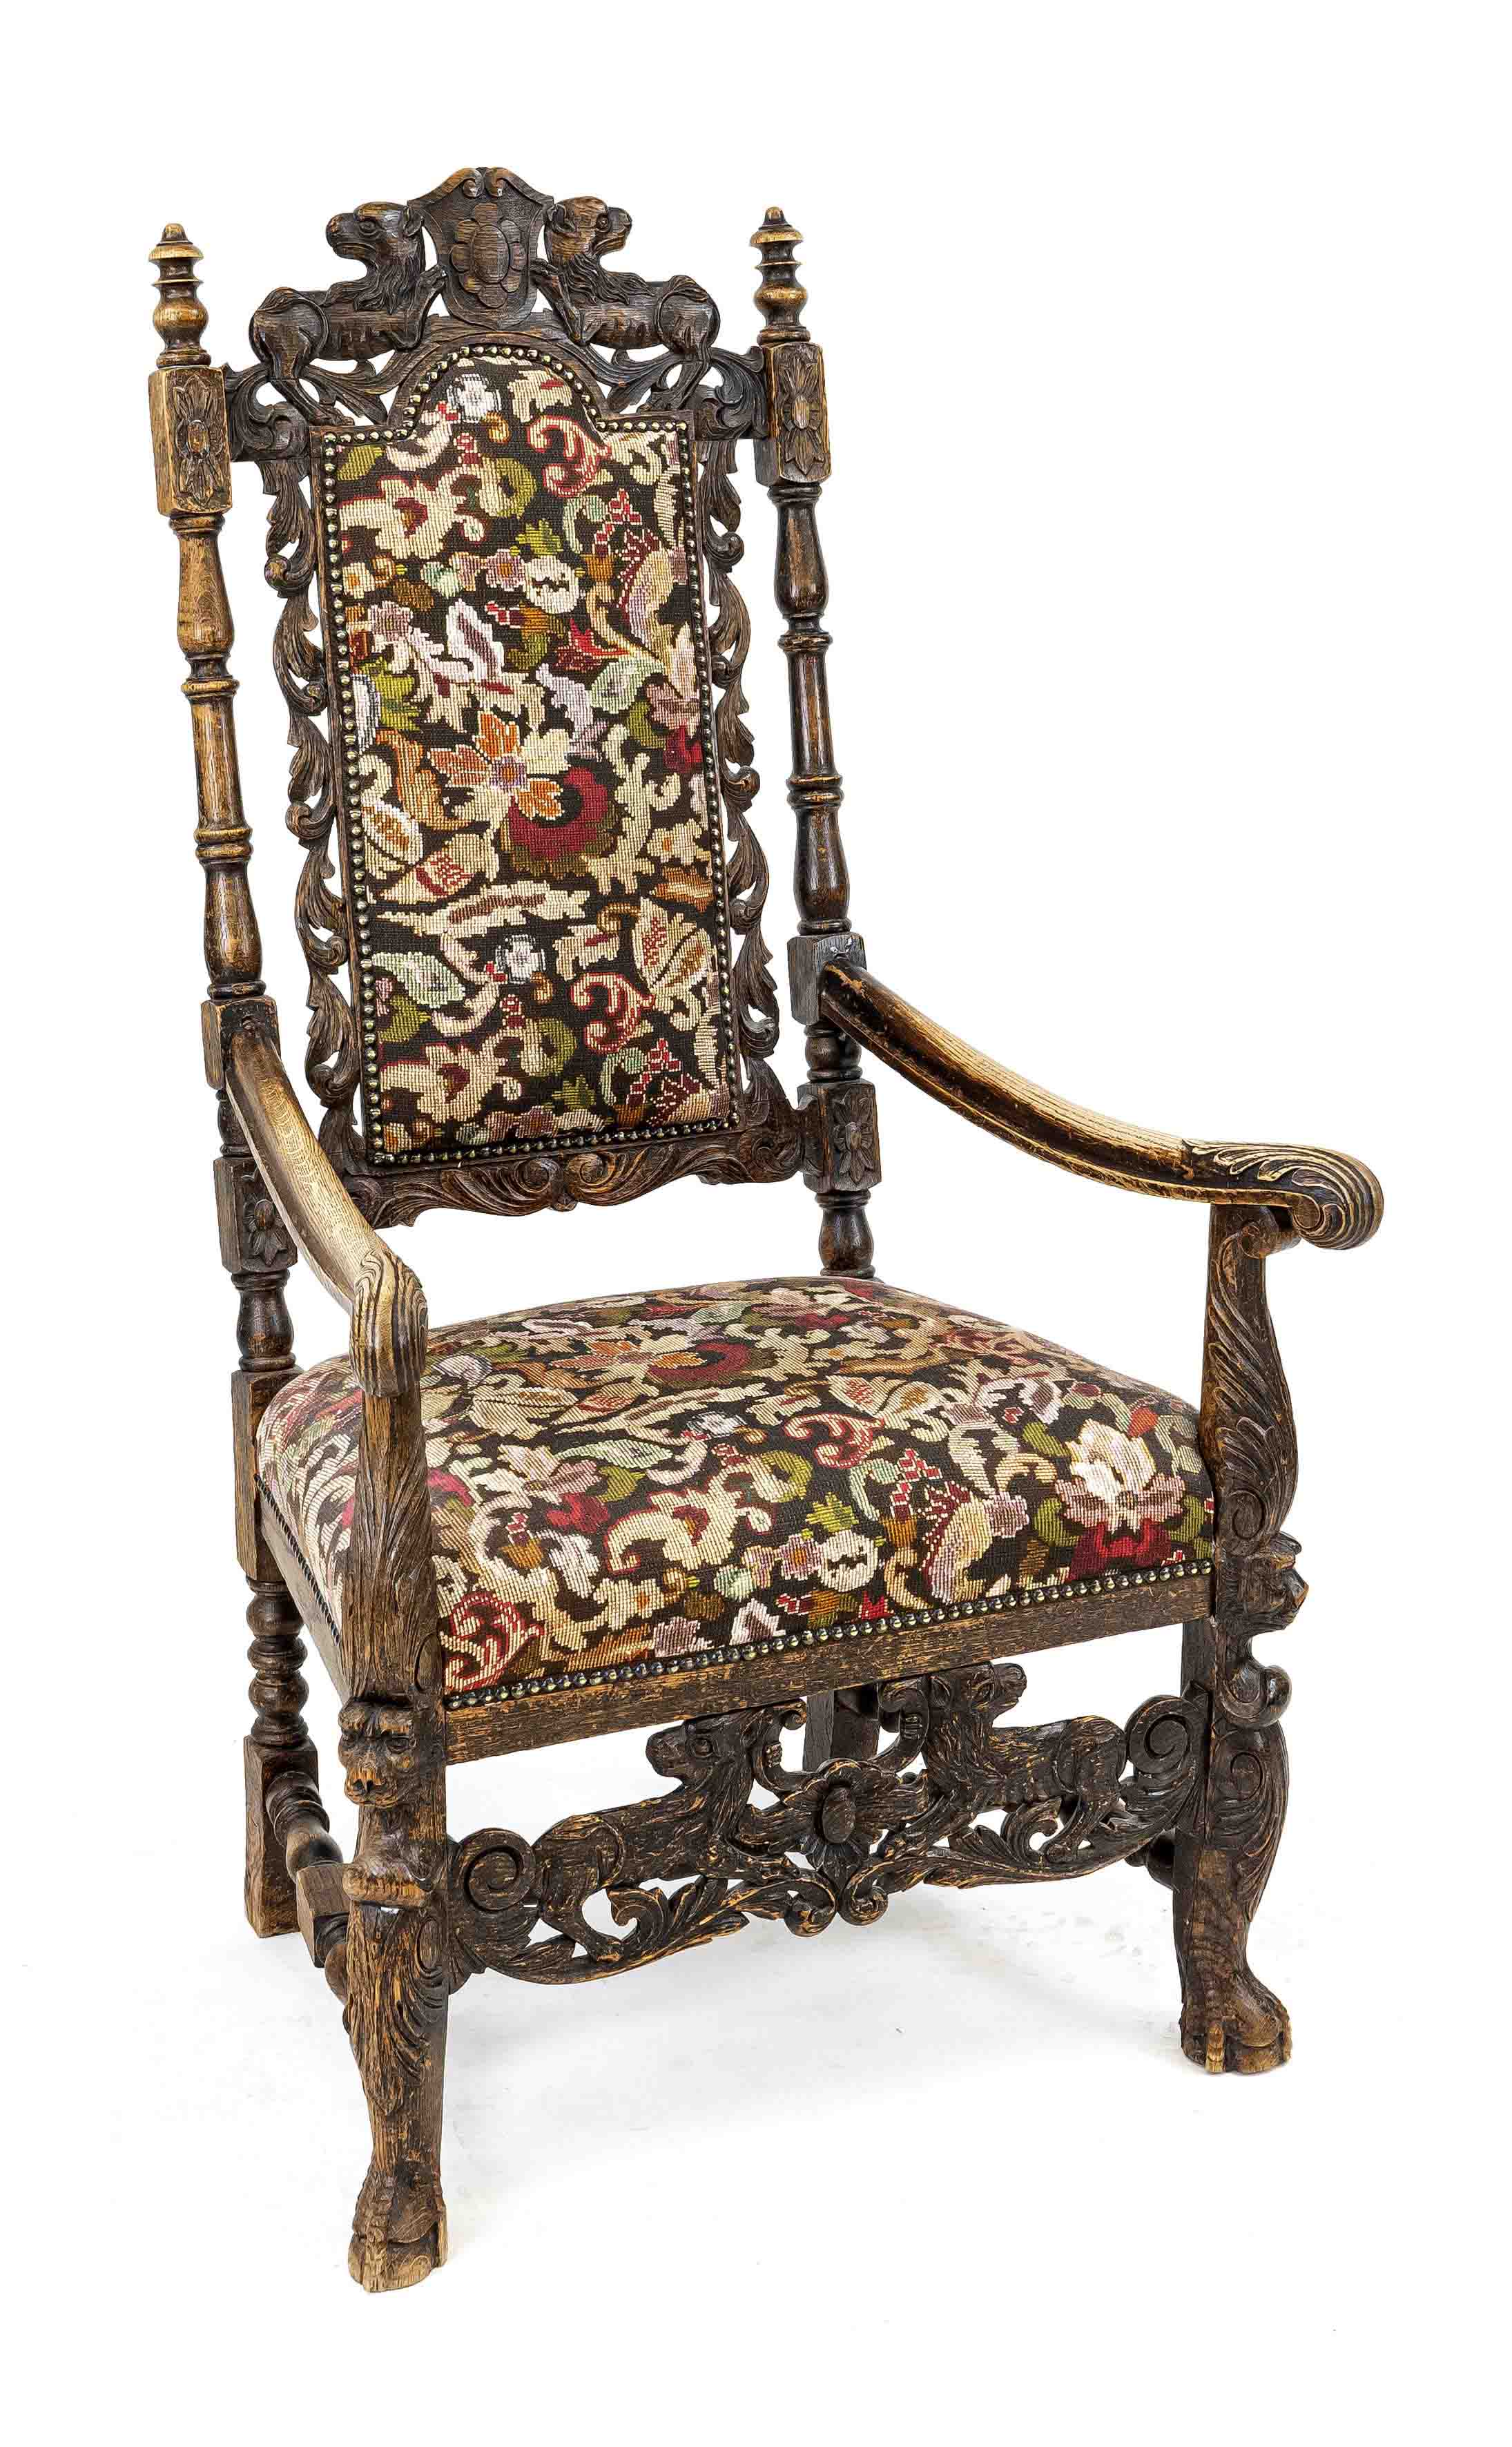 Armchair from around 1880, oak, carving typical of the period, 126 x 70 x 60 cm